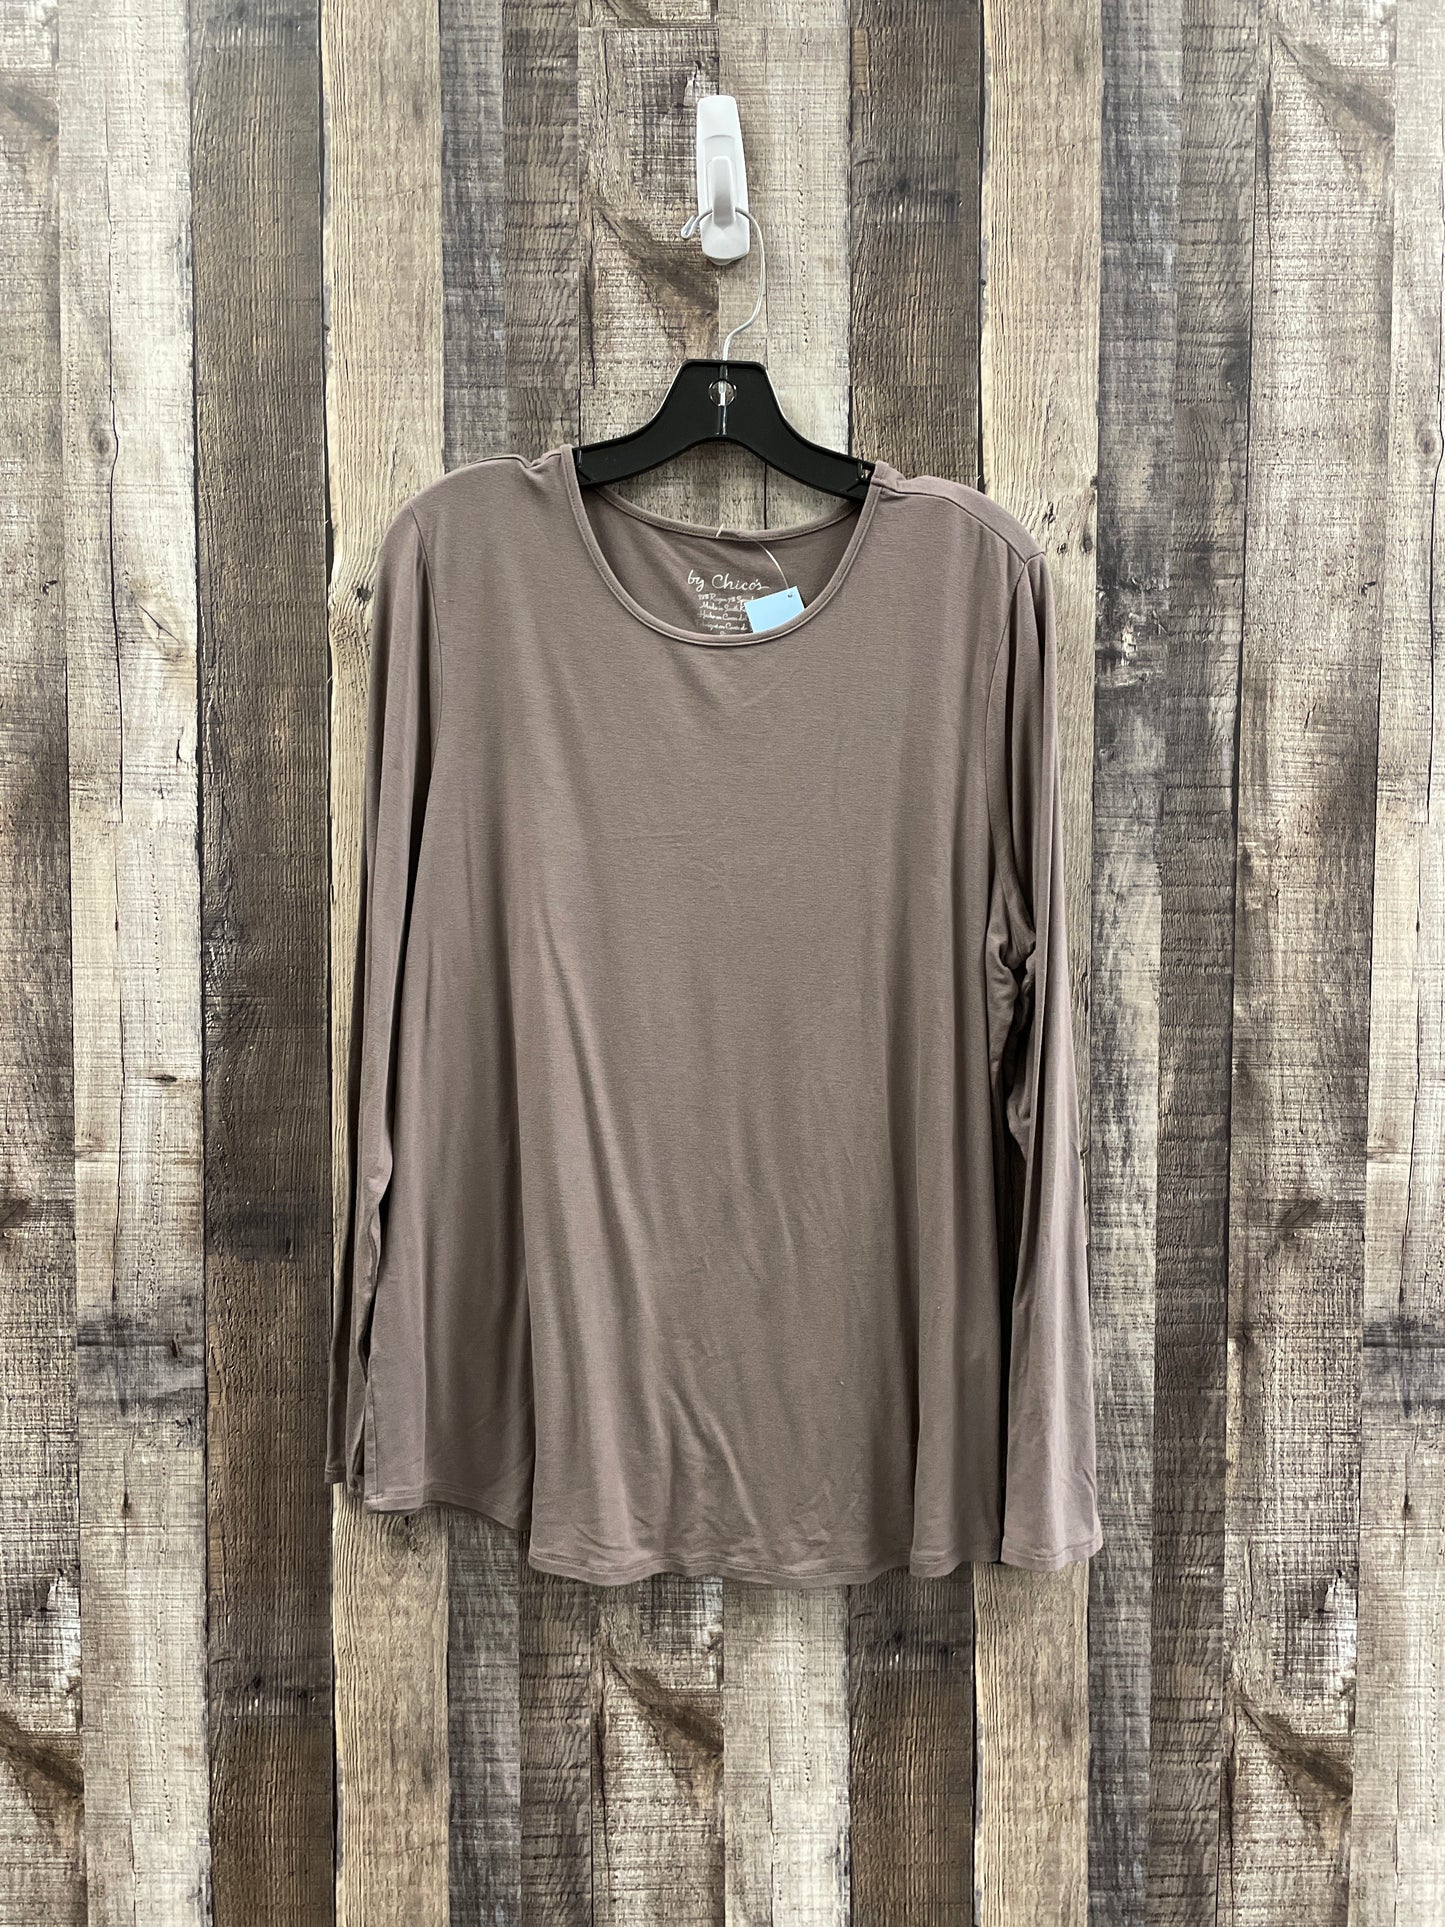 Tunic Long Sleeve By Chicos  Size: Xl